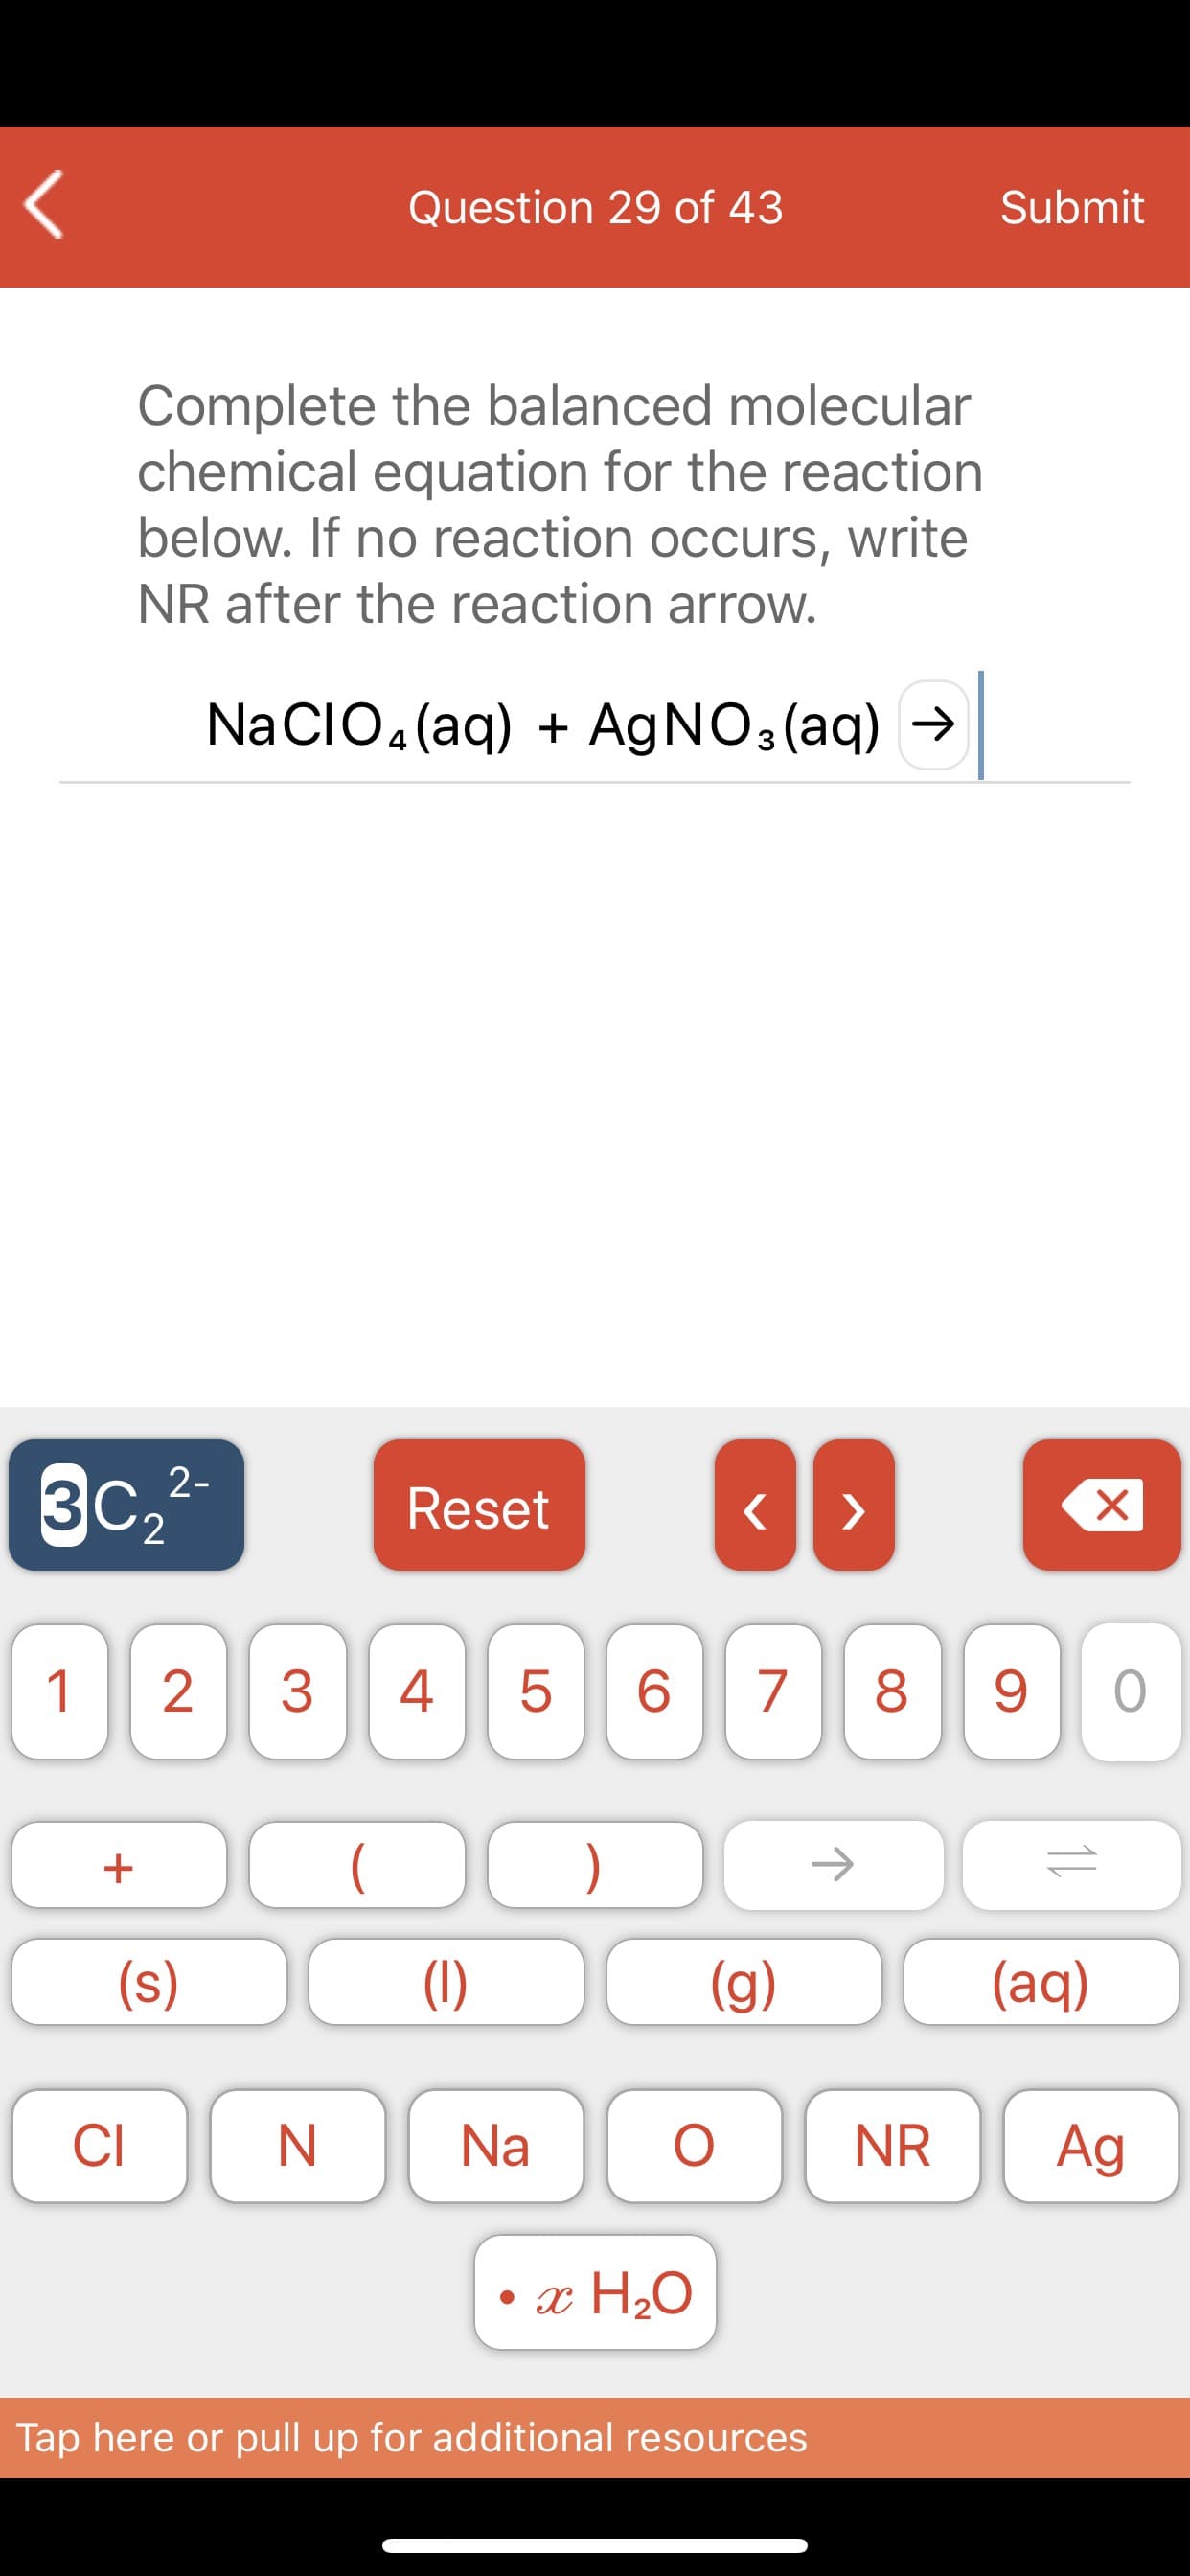 L
Submit
Question 29 of 43
Complete the balanced molecular
chemical equation for the reaction
below. If no reaction occurs, write
NR after the reaction arrow.
NaCIO4 (aq) AgNO3(aq)
X
Reset
ЗС,2-
2
7
6
5
4
2
1
)
(aq)
(g)
(1)
(s)
Ag
NR
О
Na
CI
ac H20
Tap here or pull up for additional resources
11
LO
3
